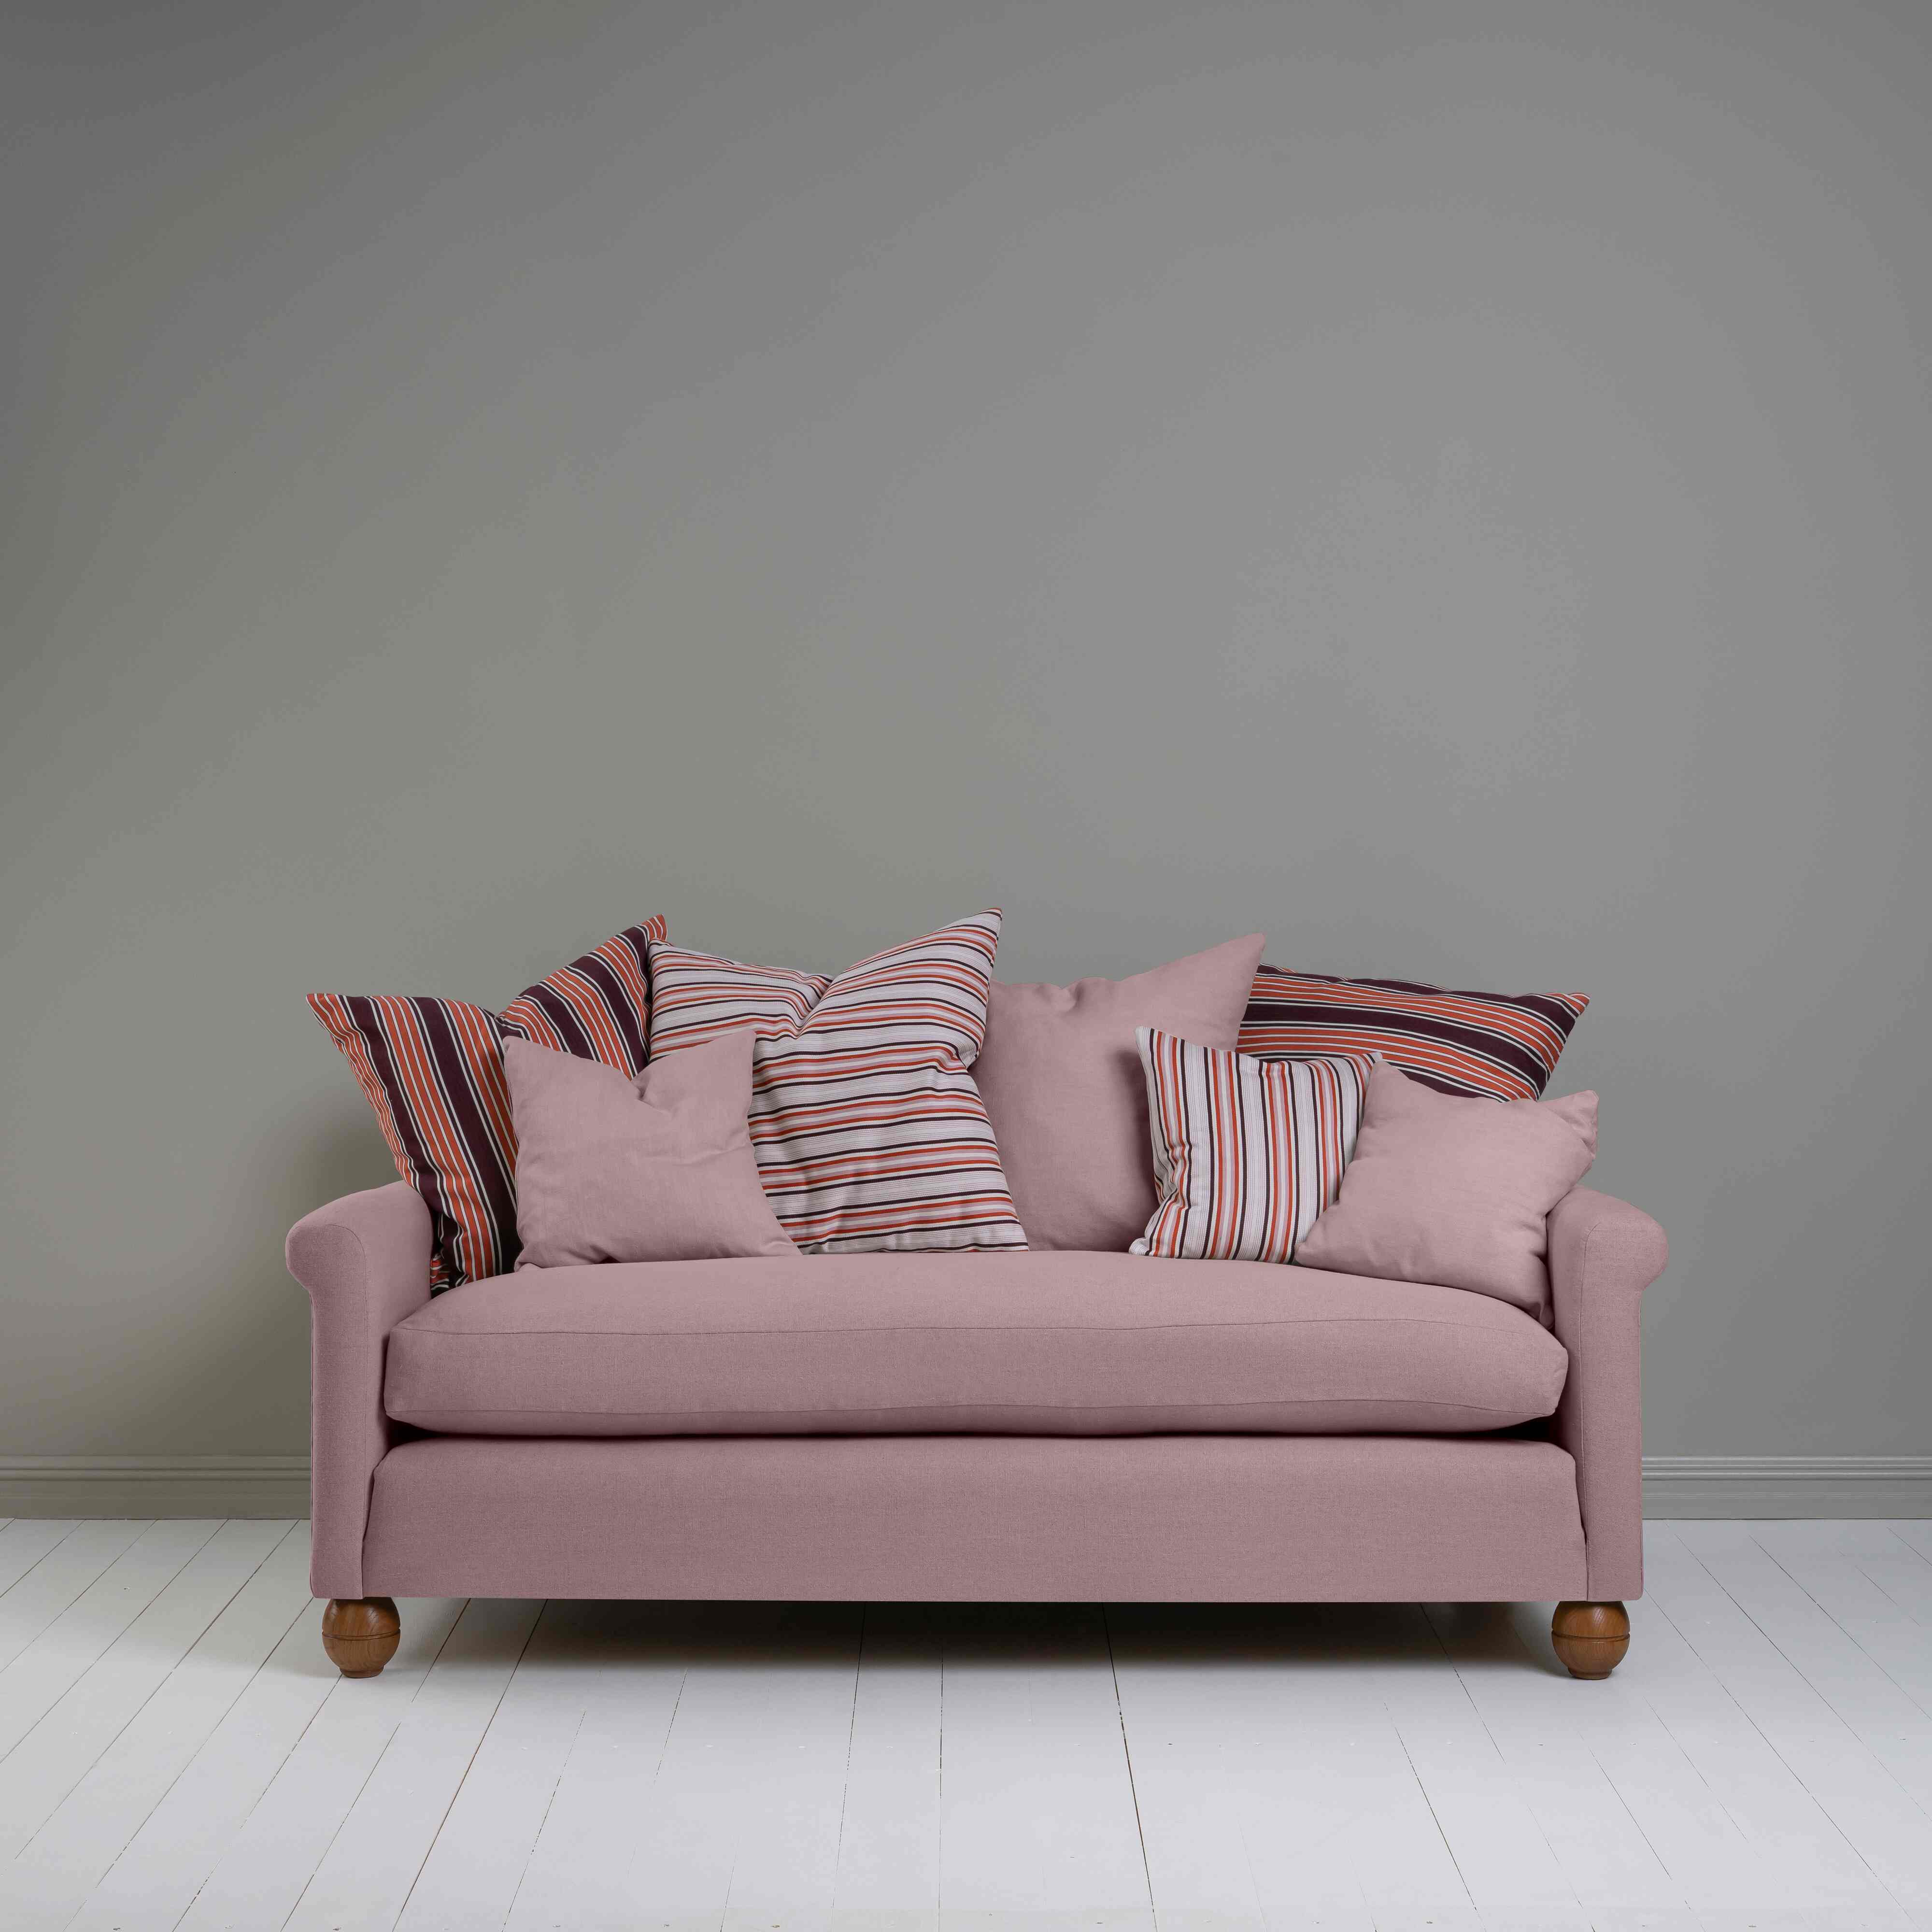  Idler 3 Seater Sofa in Laidback Linen Heather 